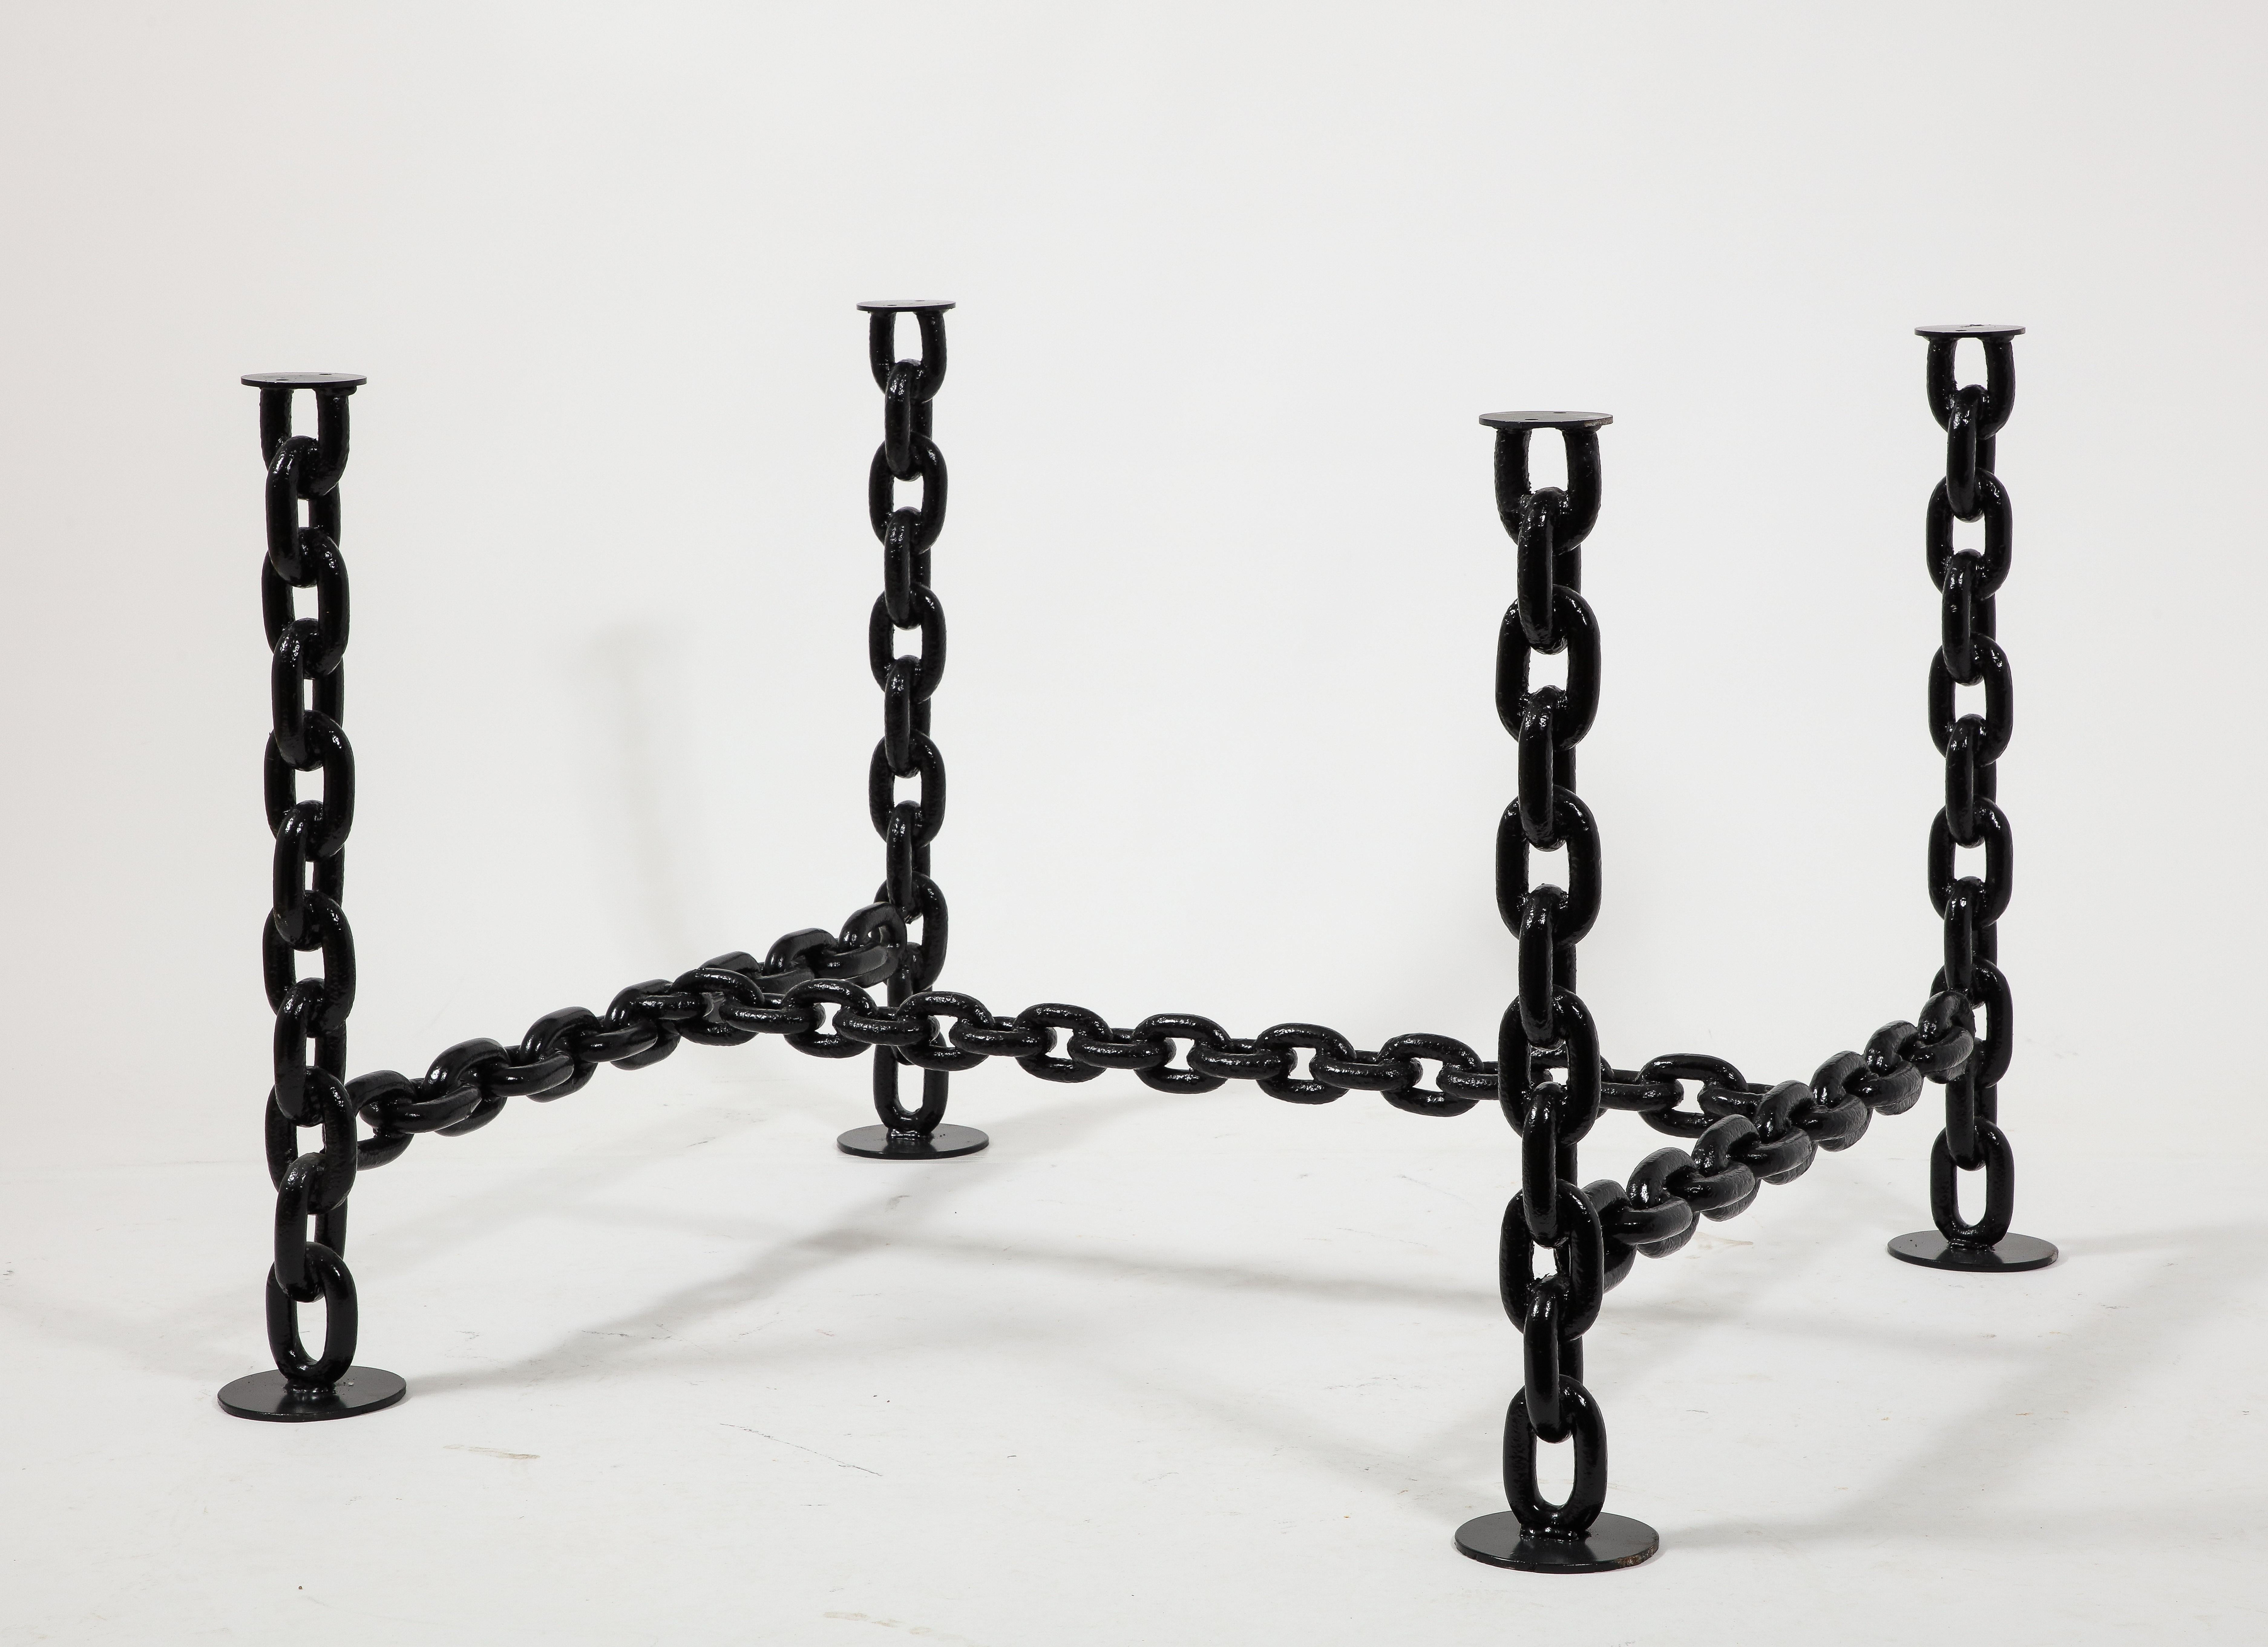 Black Lacquered Brutalist Marine Chains Dining Table Structure - France 1970s For Sale 3